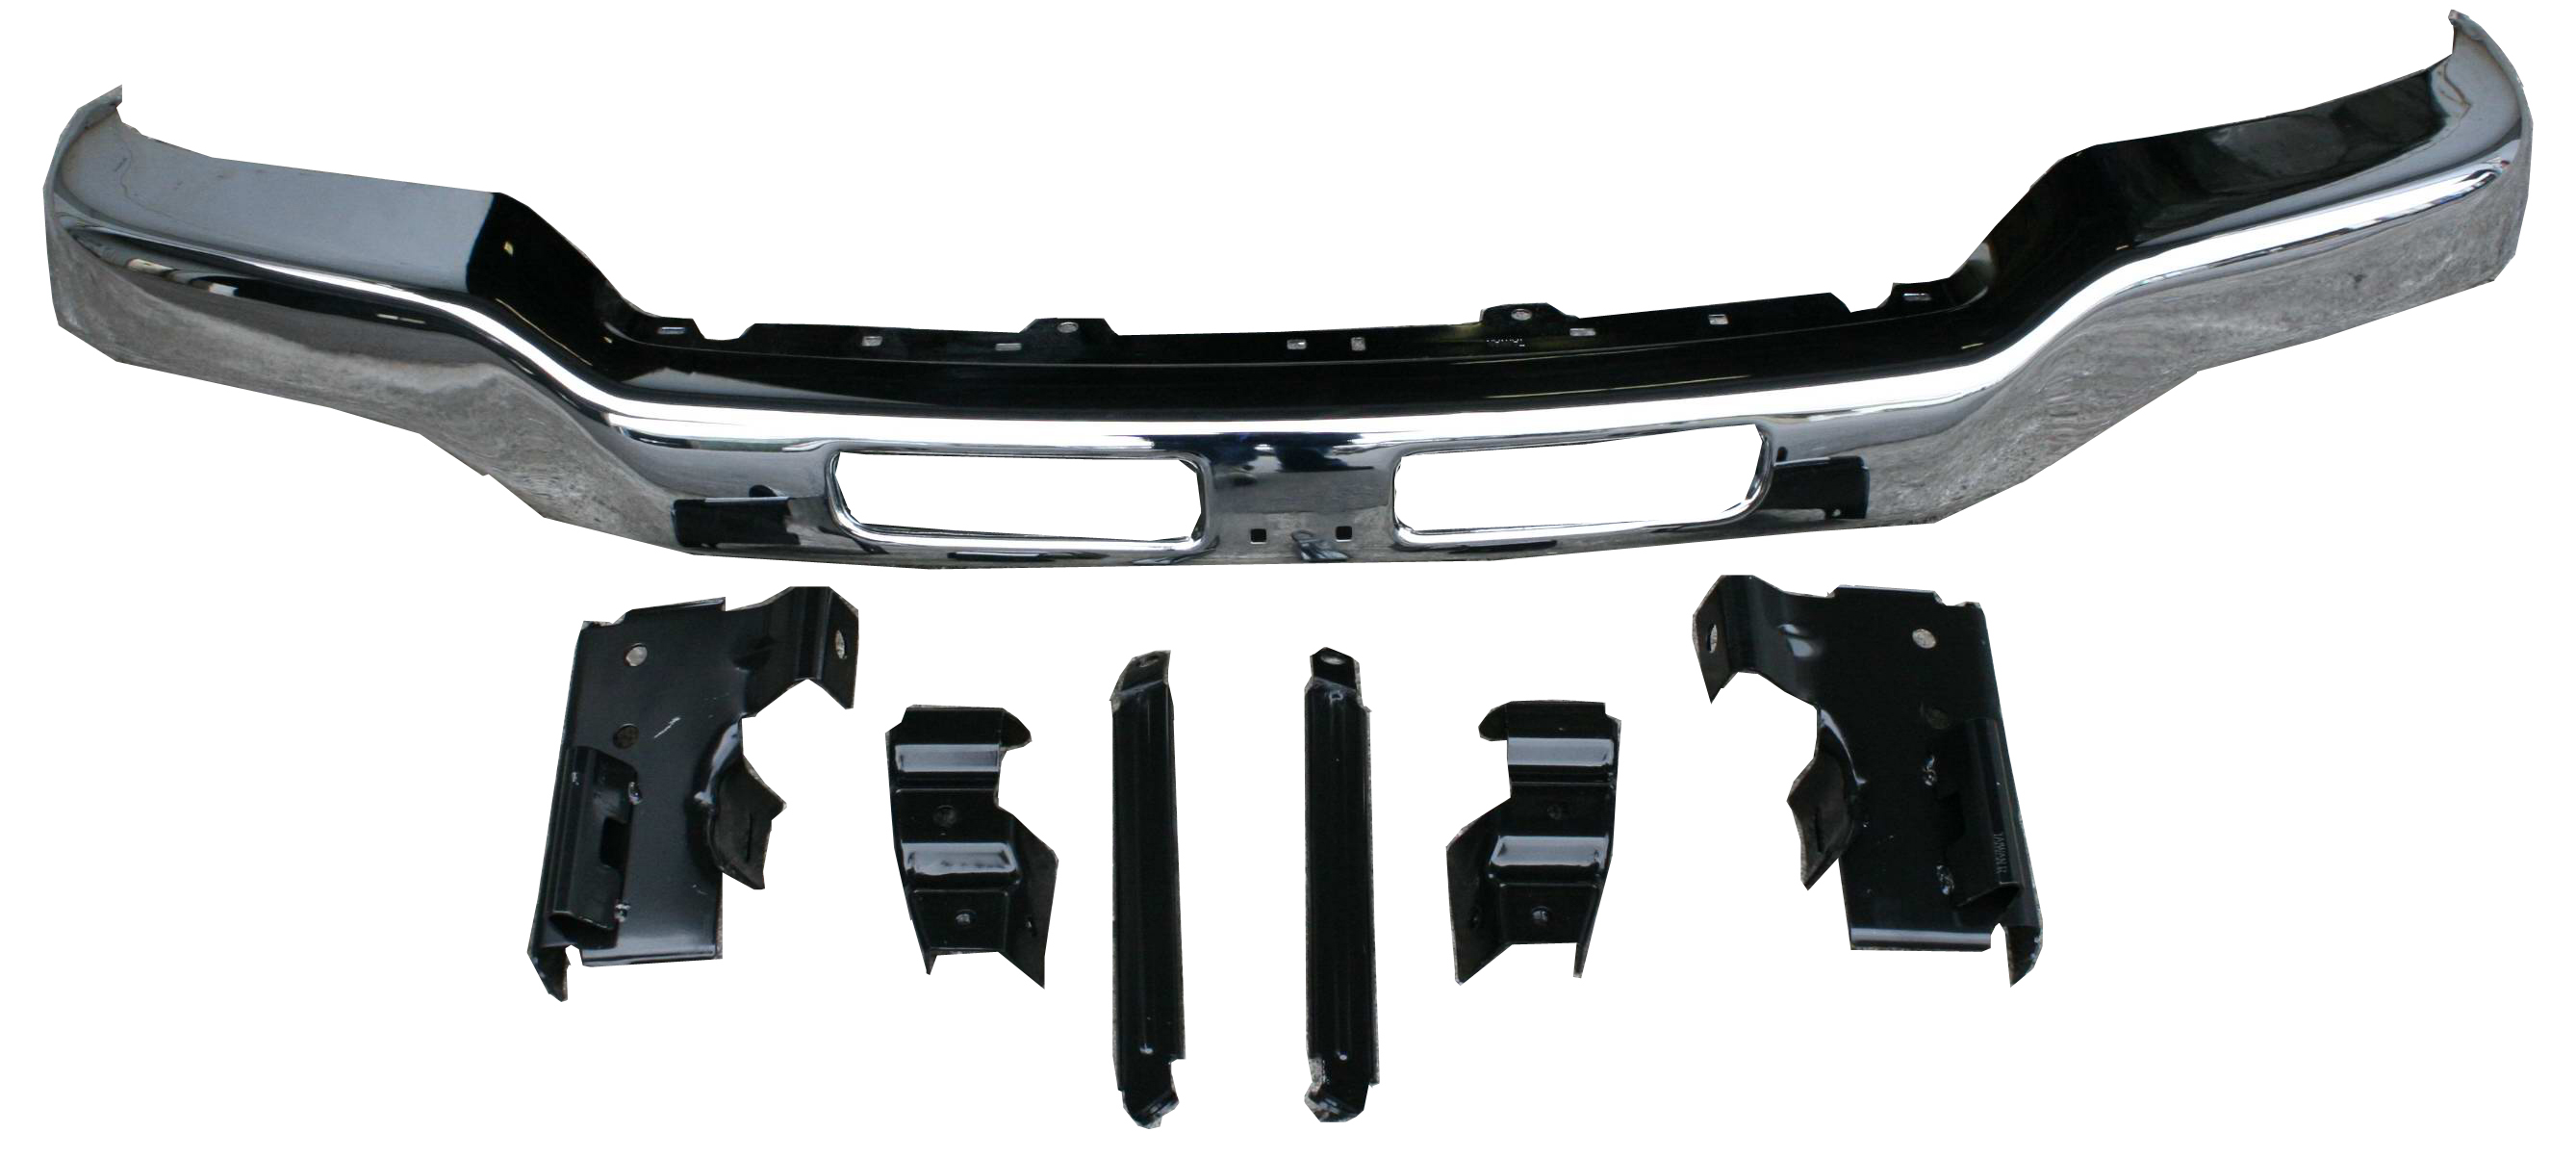 Aftermarket METAL FRONT BUMPERS for GMC - SIERRA 1500 CLASSIC, SIERRA 1500 CLASSIC,07-07,Front bumper face bar